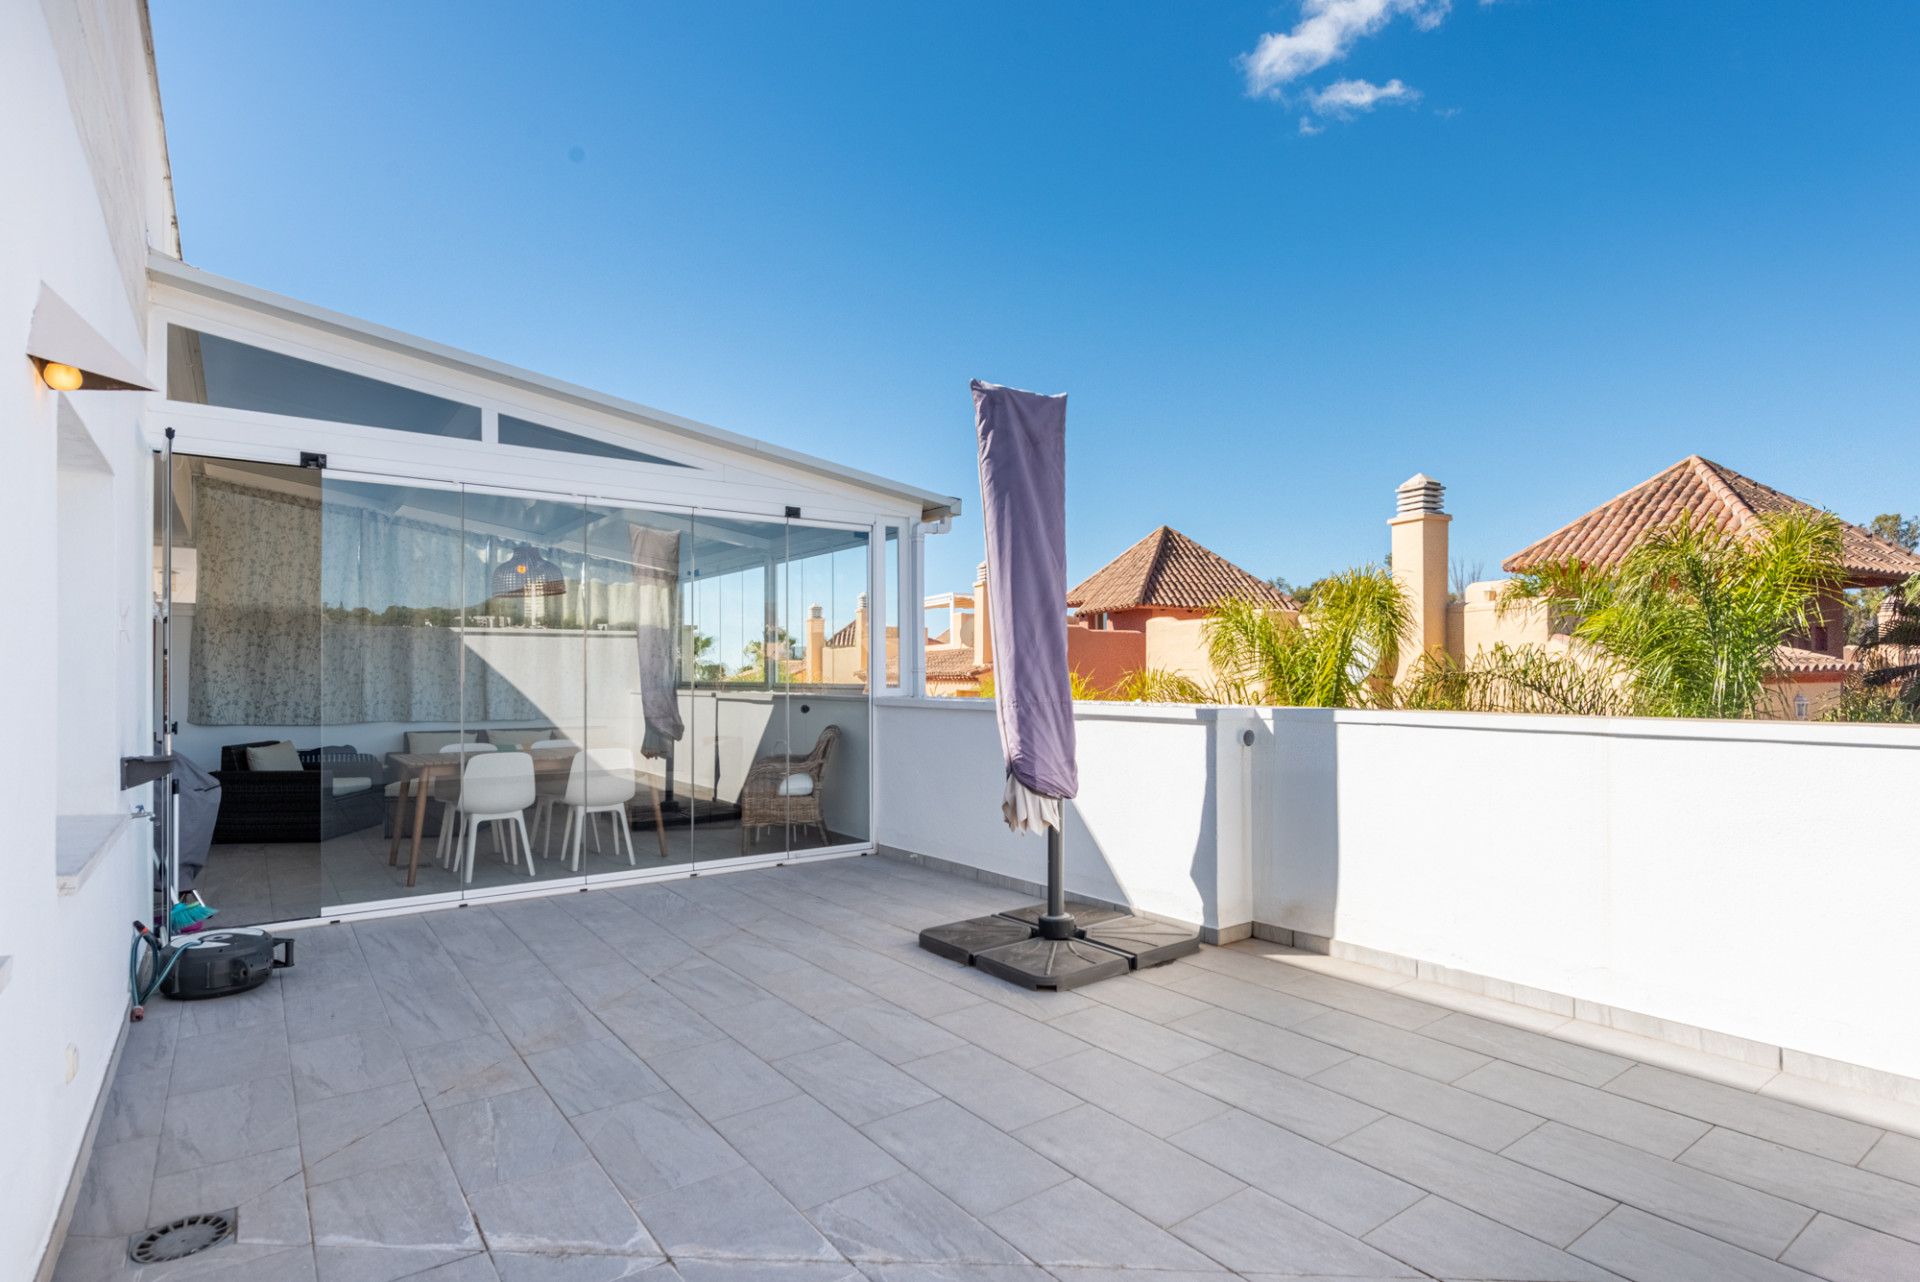 Attractive penthouse apartment with a large covered & open terrace close to the beach and to Puerto Banus!